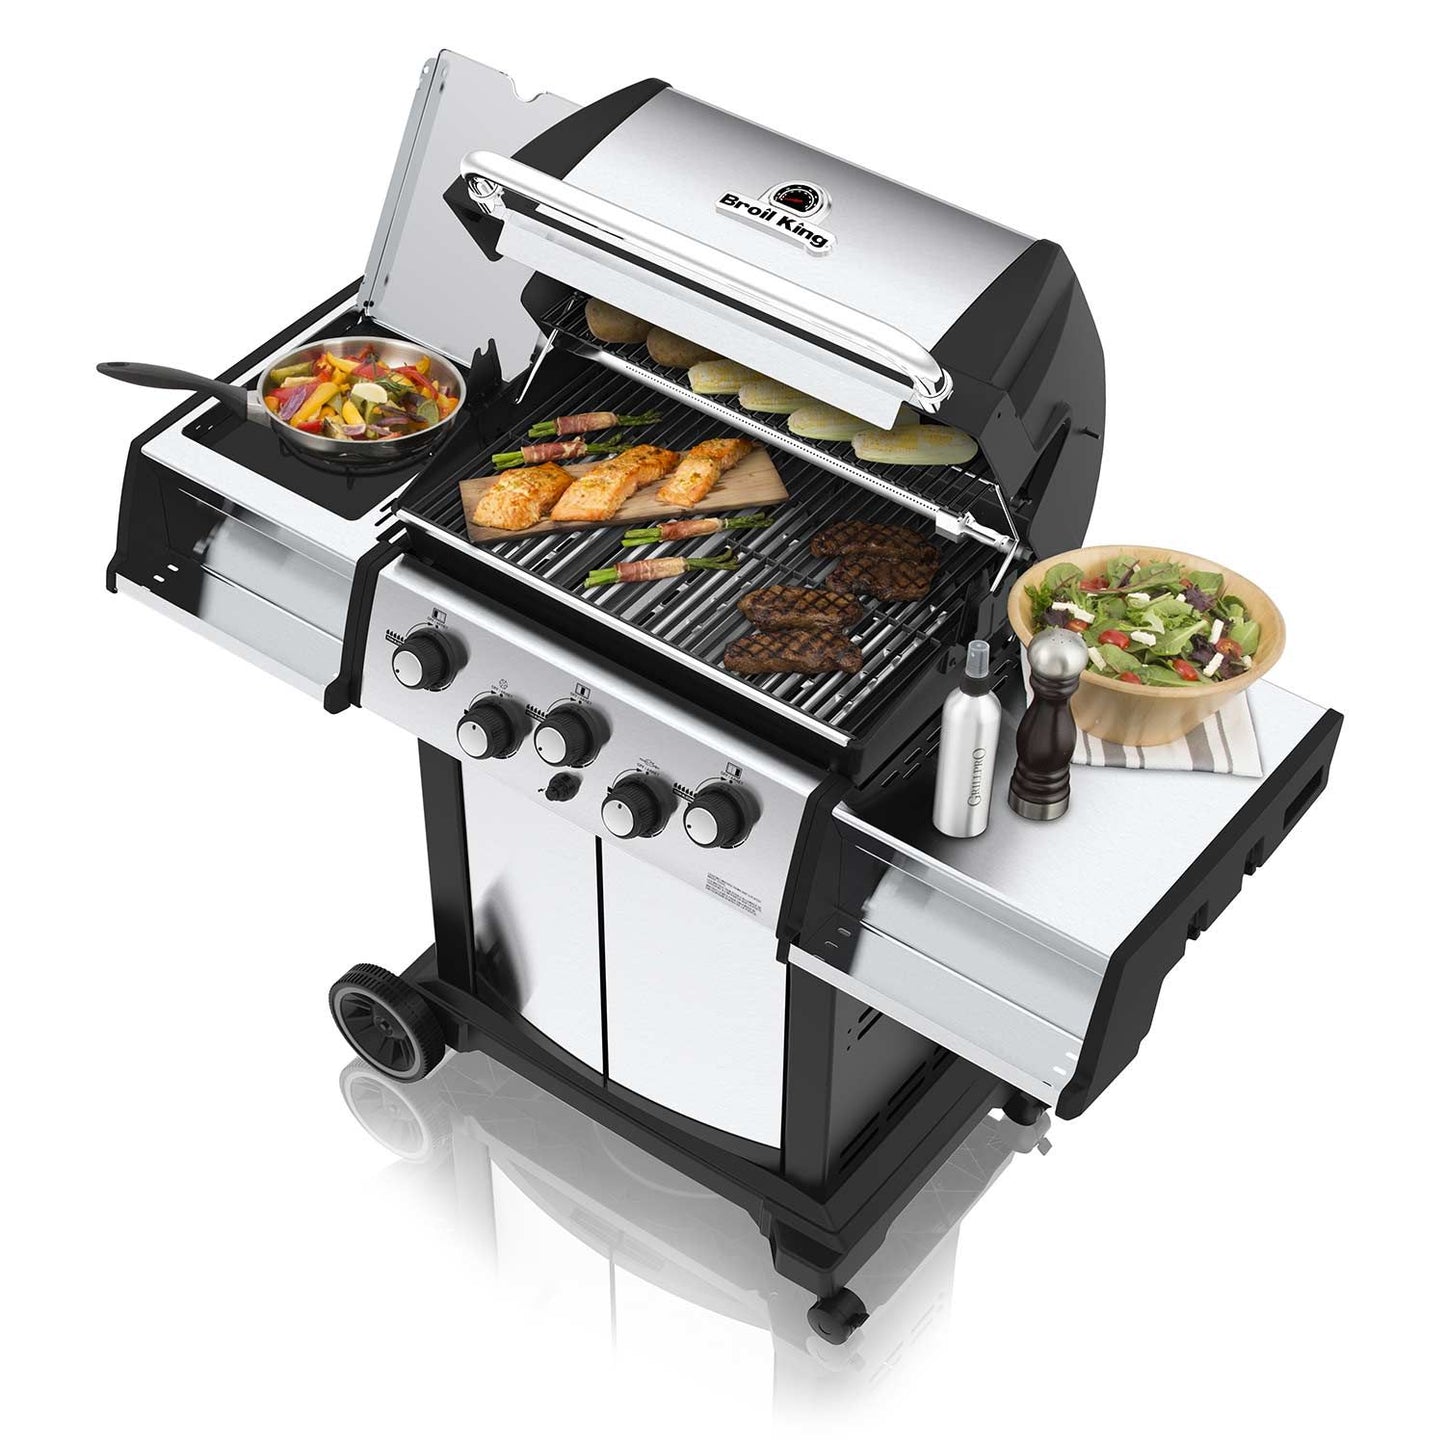 Broil King Signet 390 Gas Grill 94688